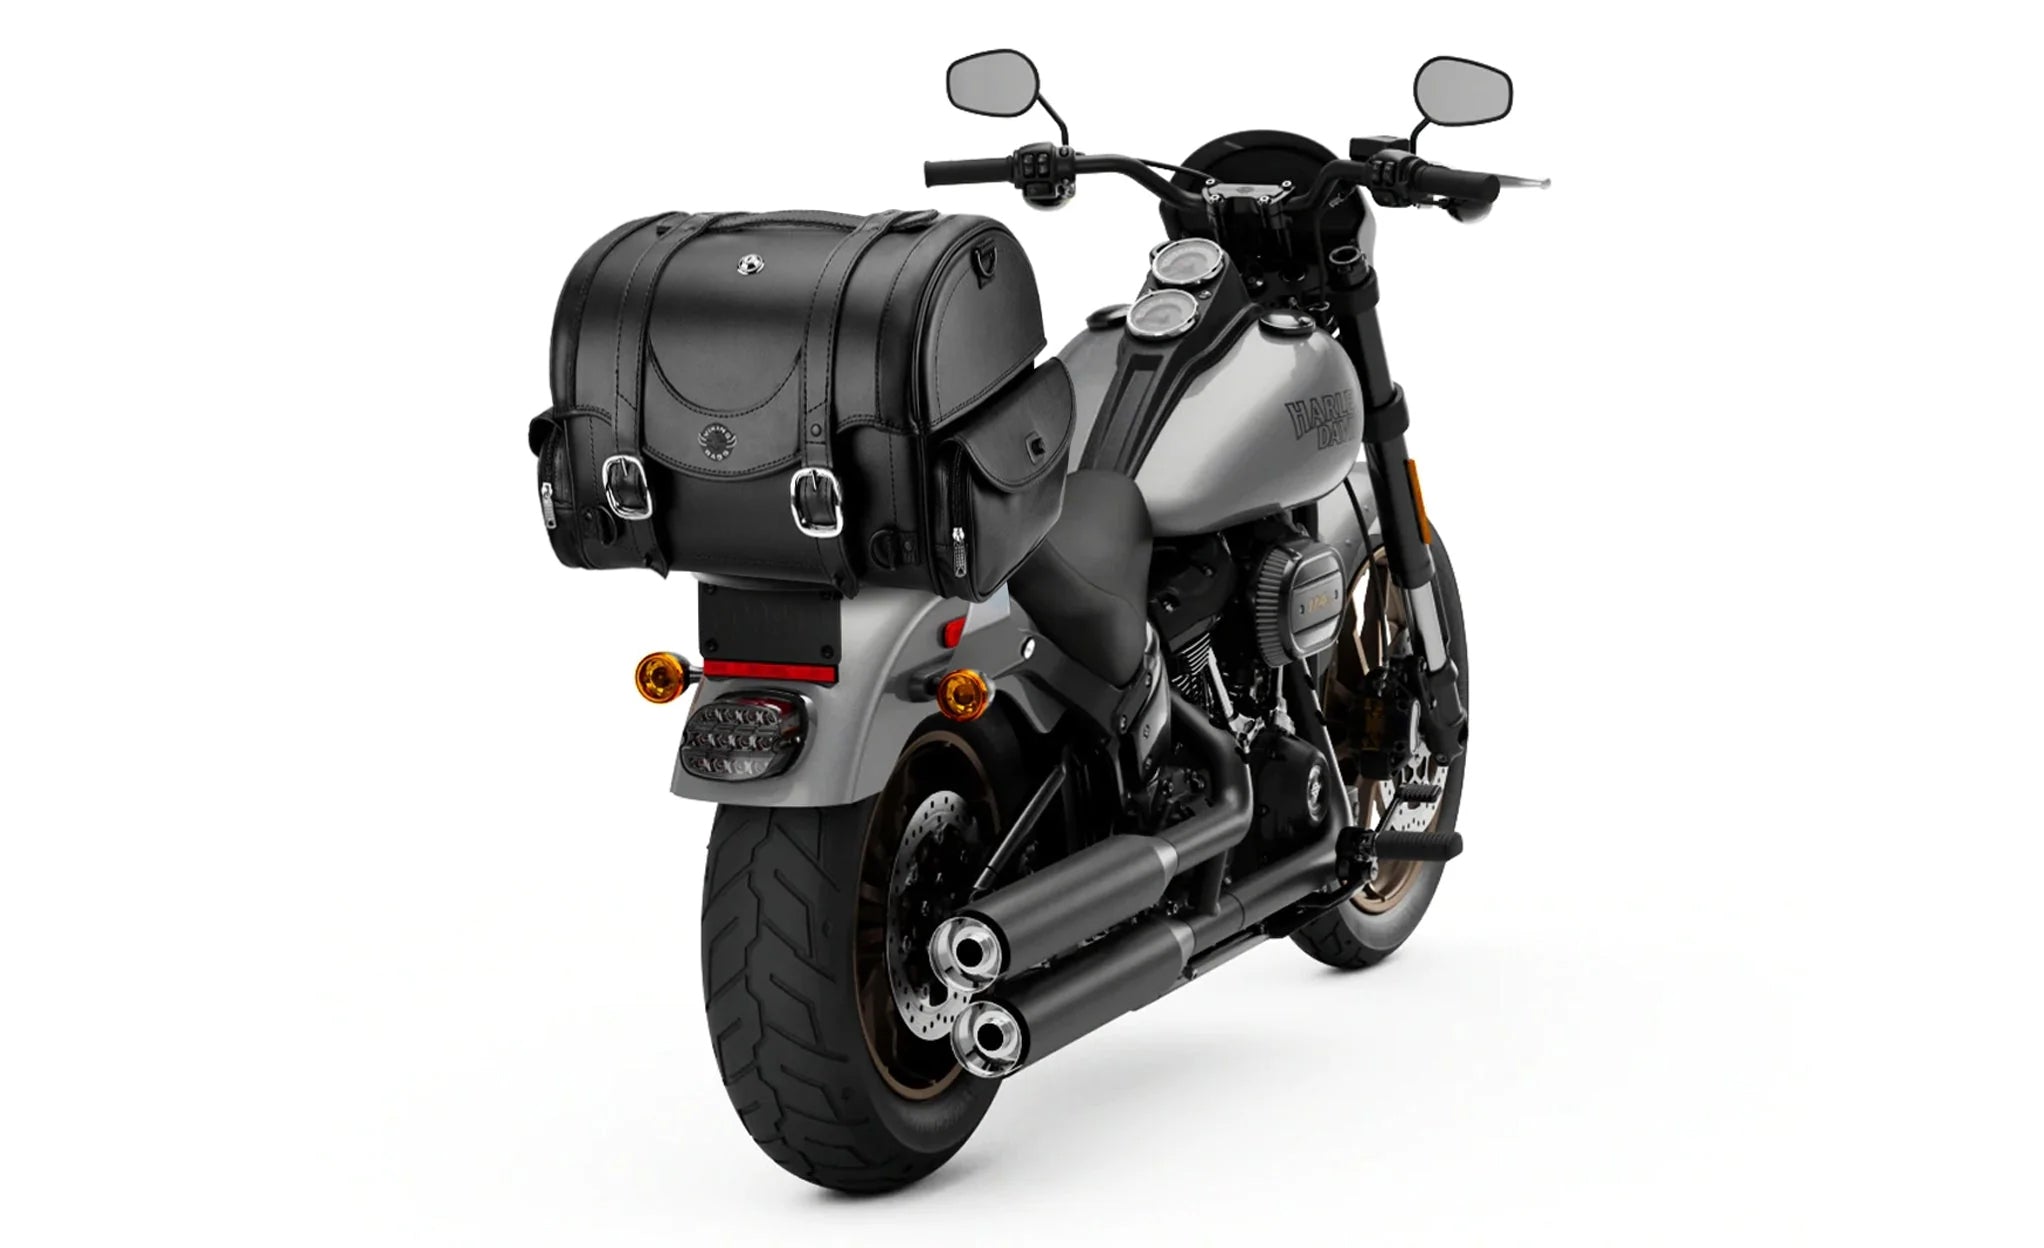 21L - Century Medium Leather Motorcycle Roll Bag for Harley Davidson on Bike Photo @expand